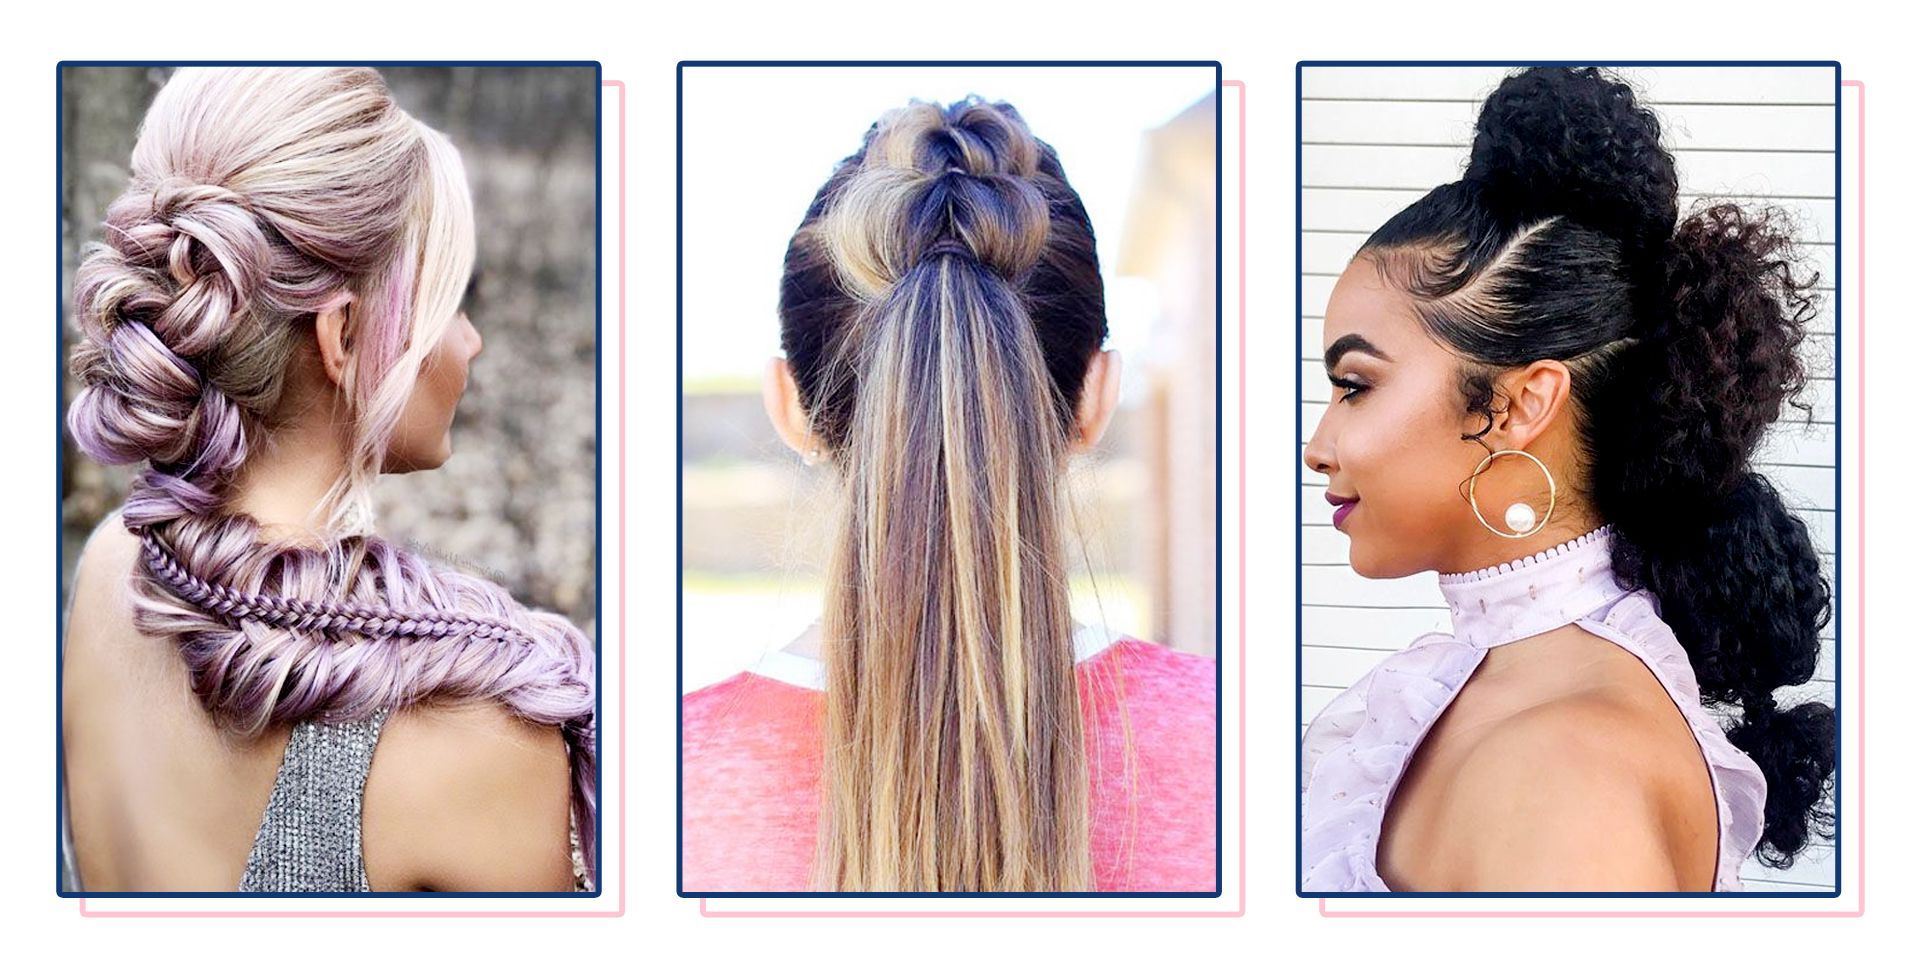 40 Best Prom Updos For 2019 – Easy Prom Updo Hairstyles Throughout Most Current Stacked Buns Updo Hairstyles (View 14 of 20)